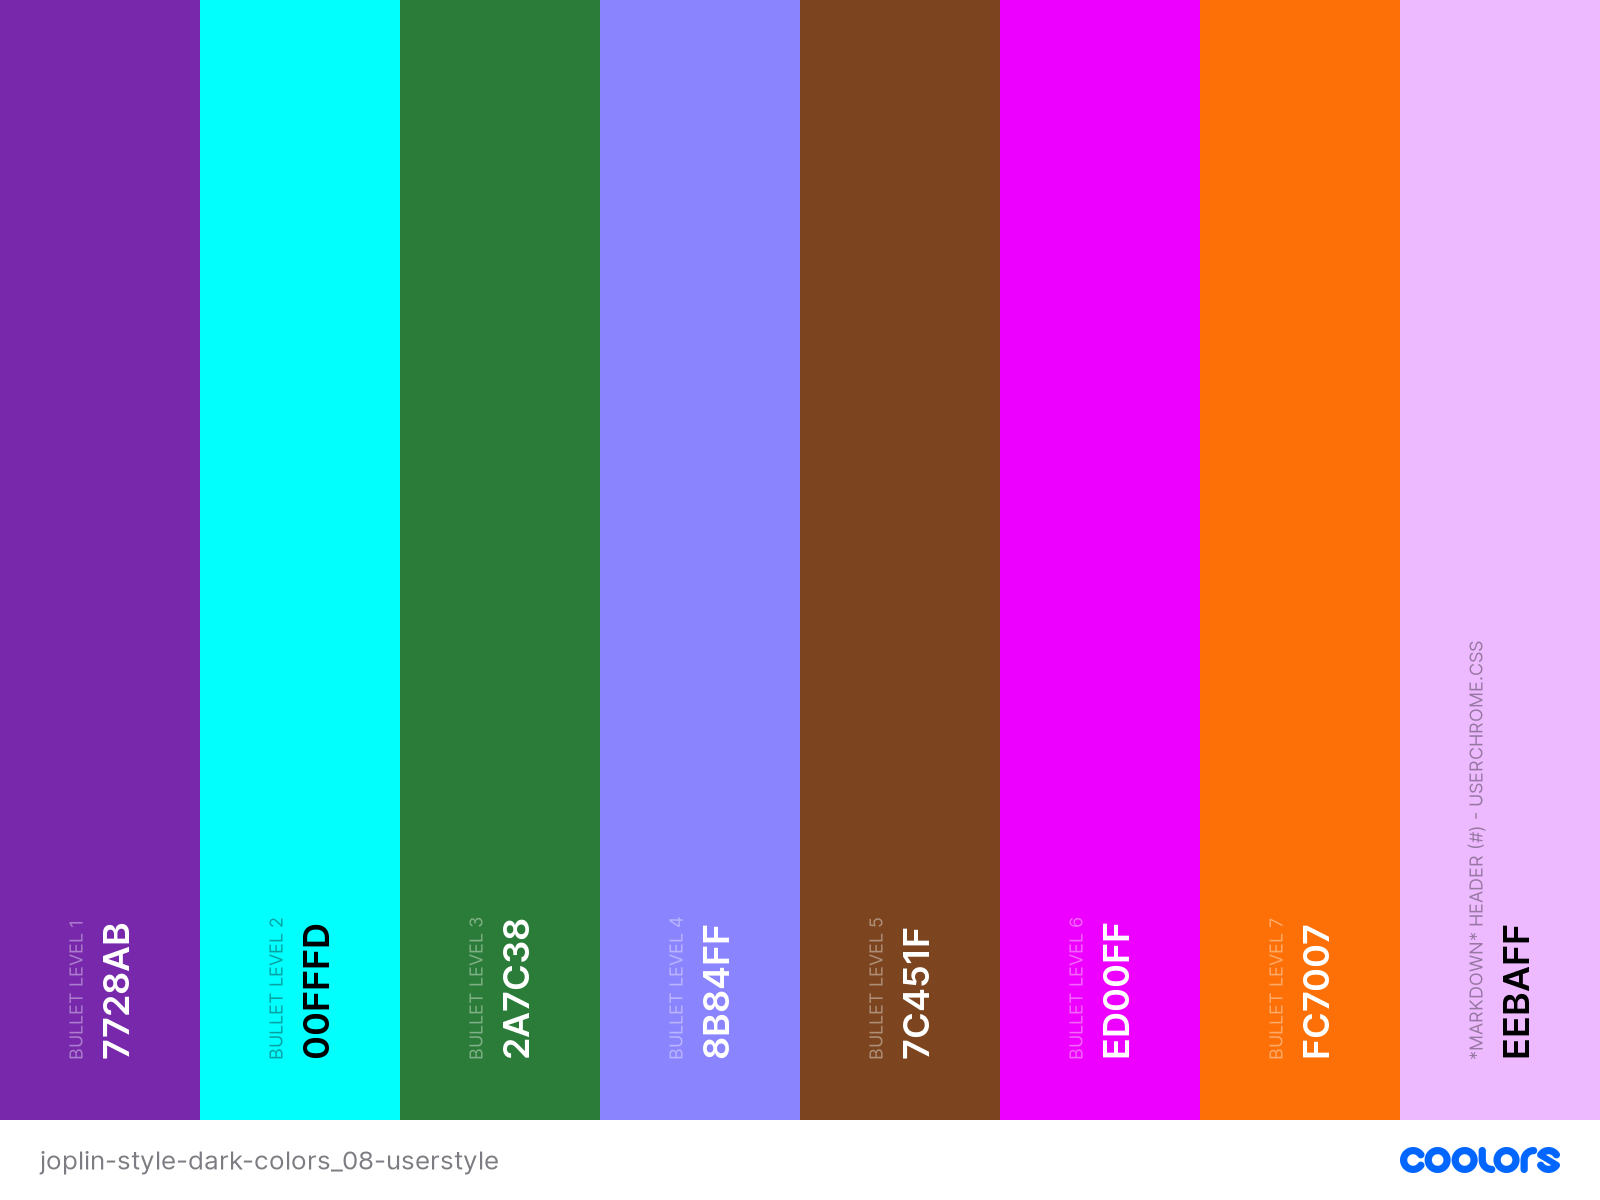 userstyle-color-pallette